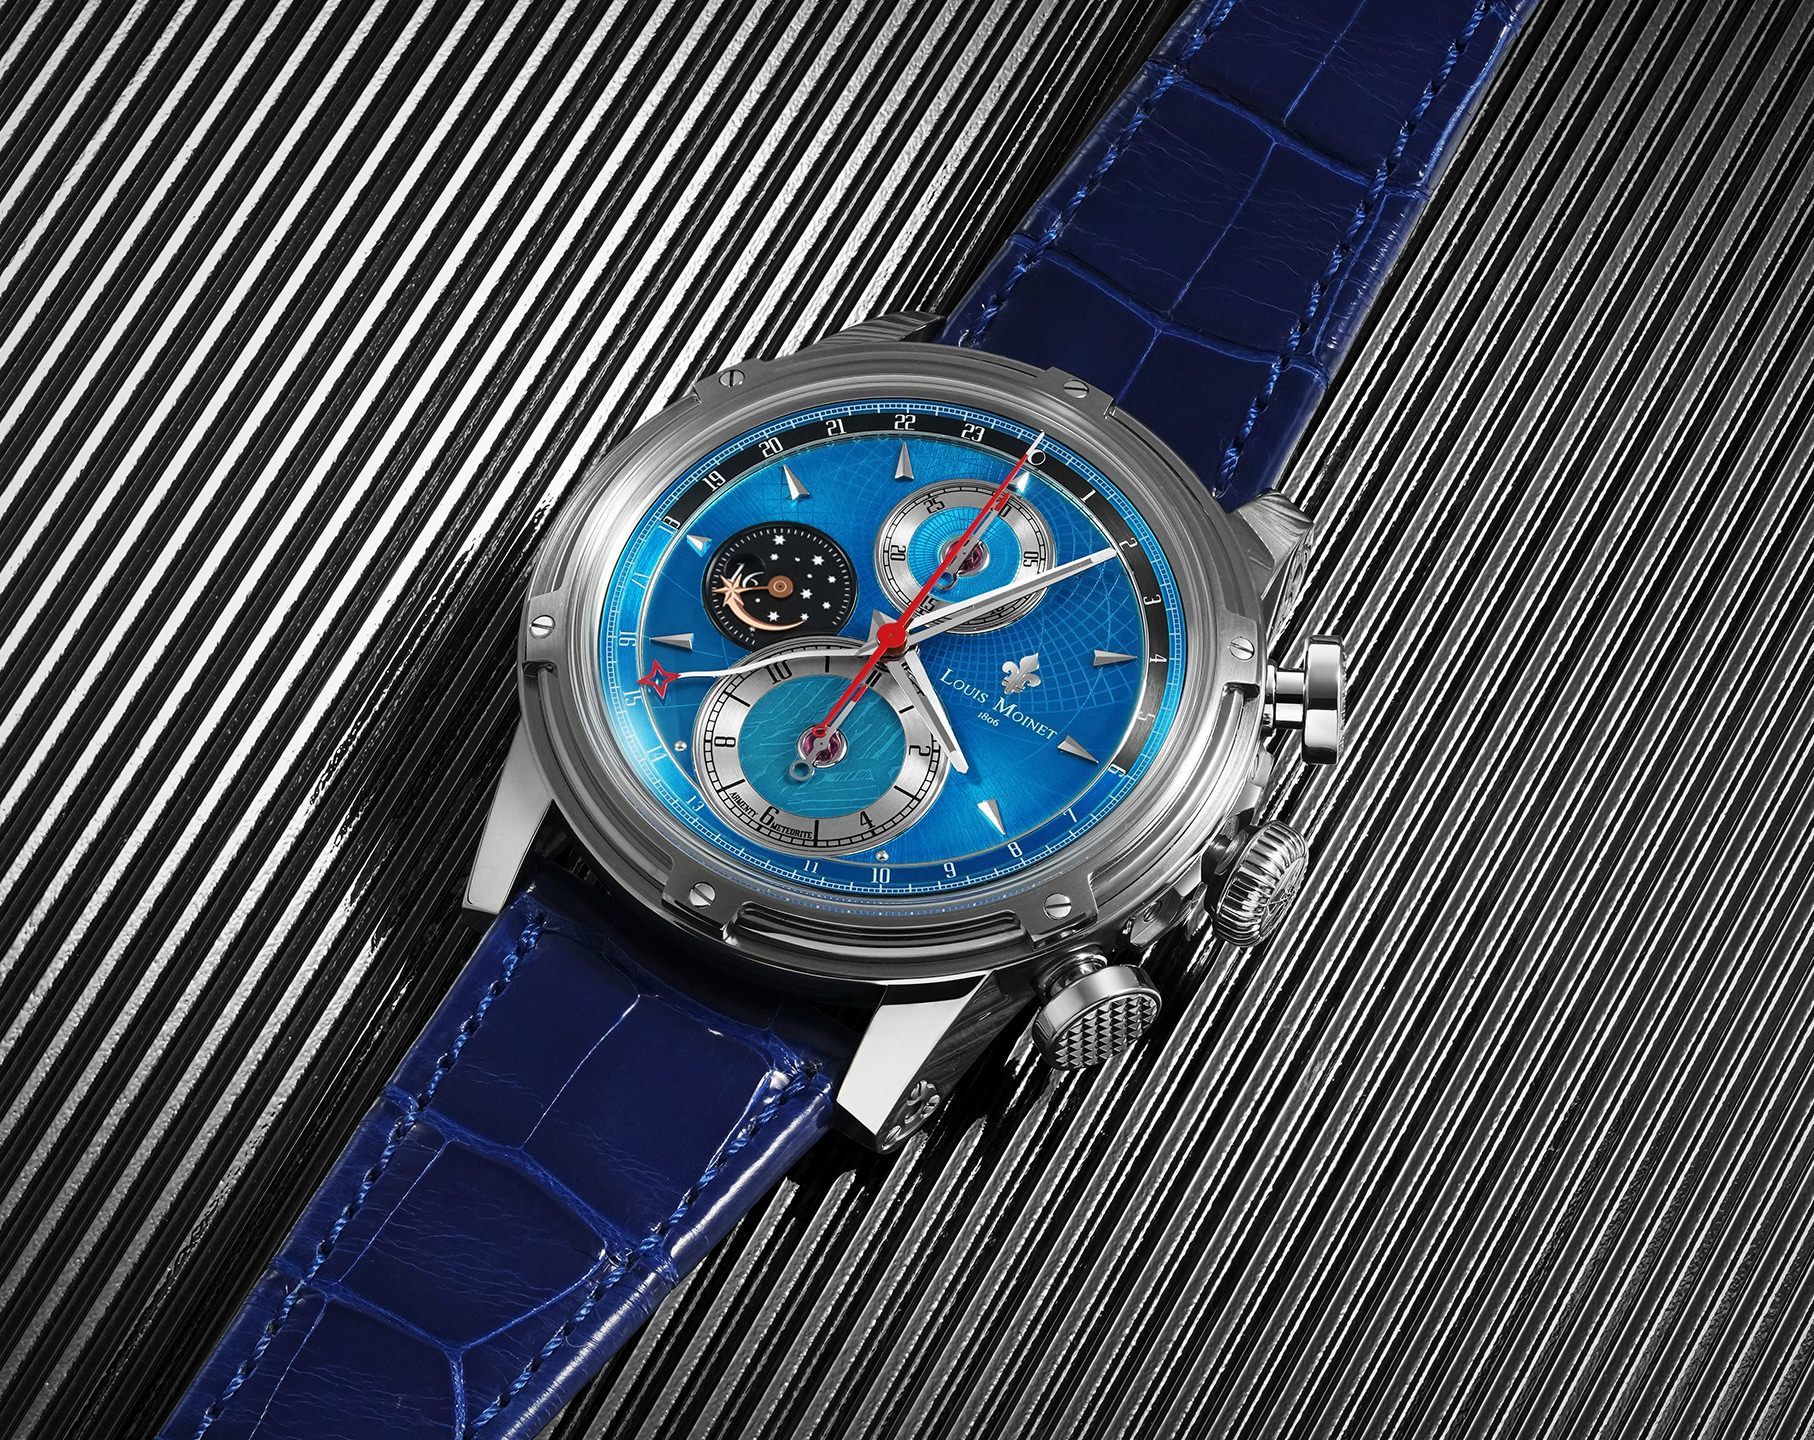 Louis Moinet Cosmic Art Midnight Star Blue Dial 46 mm Automatic Watch For Men - 8